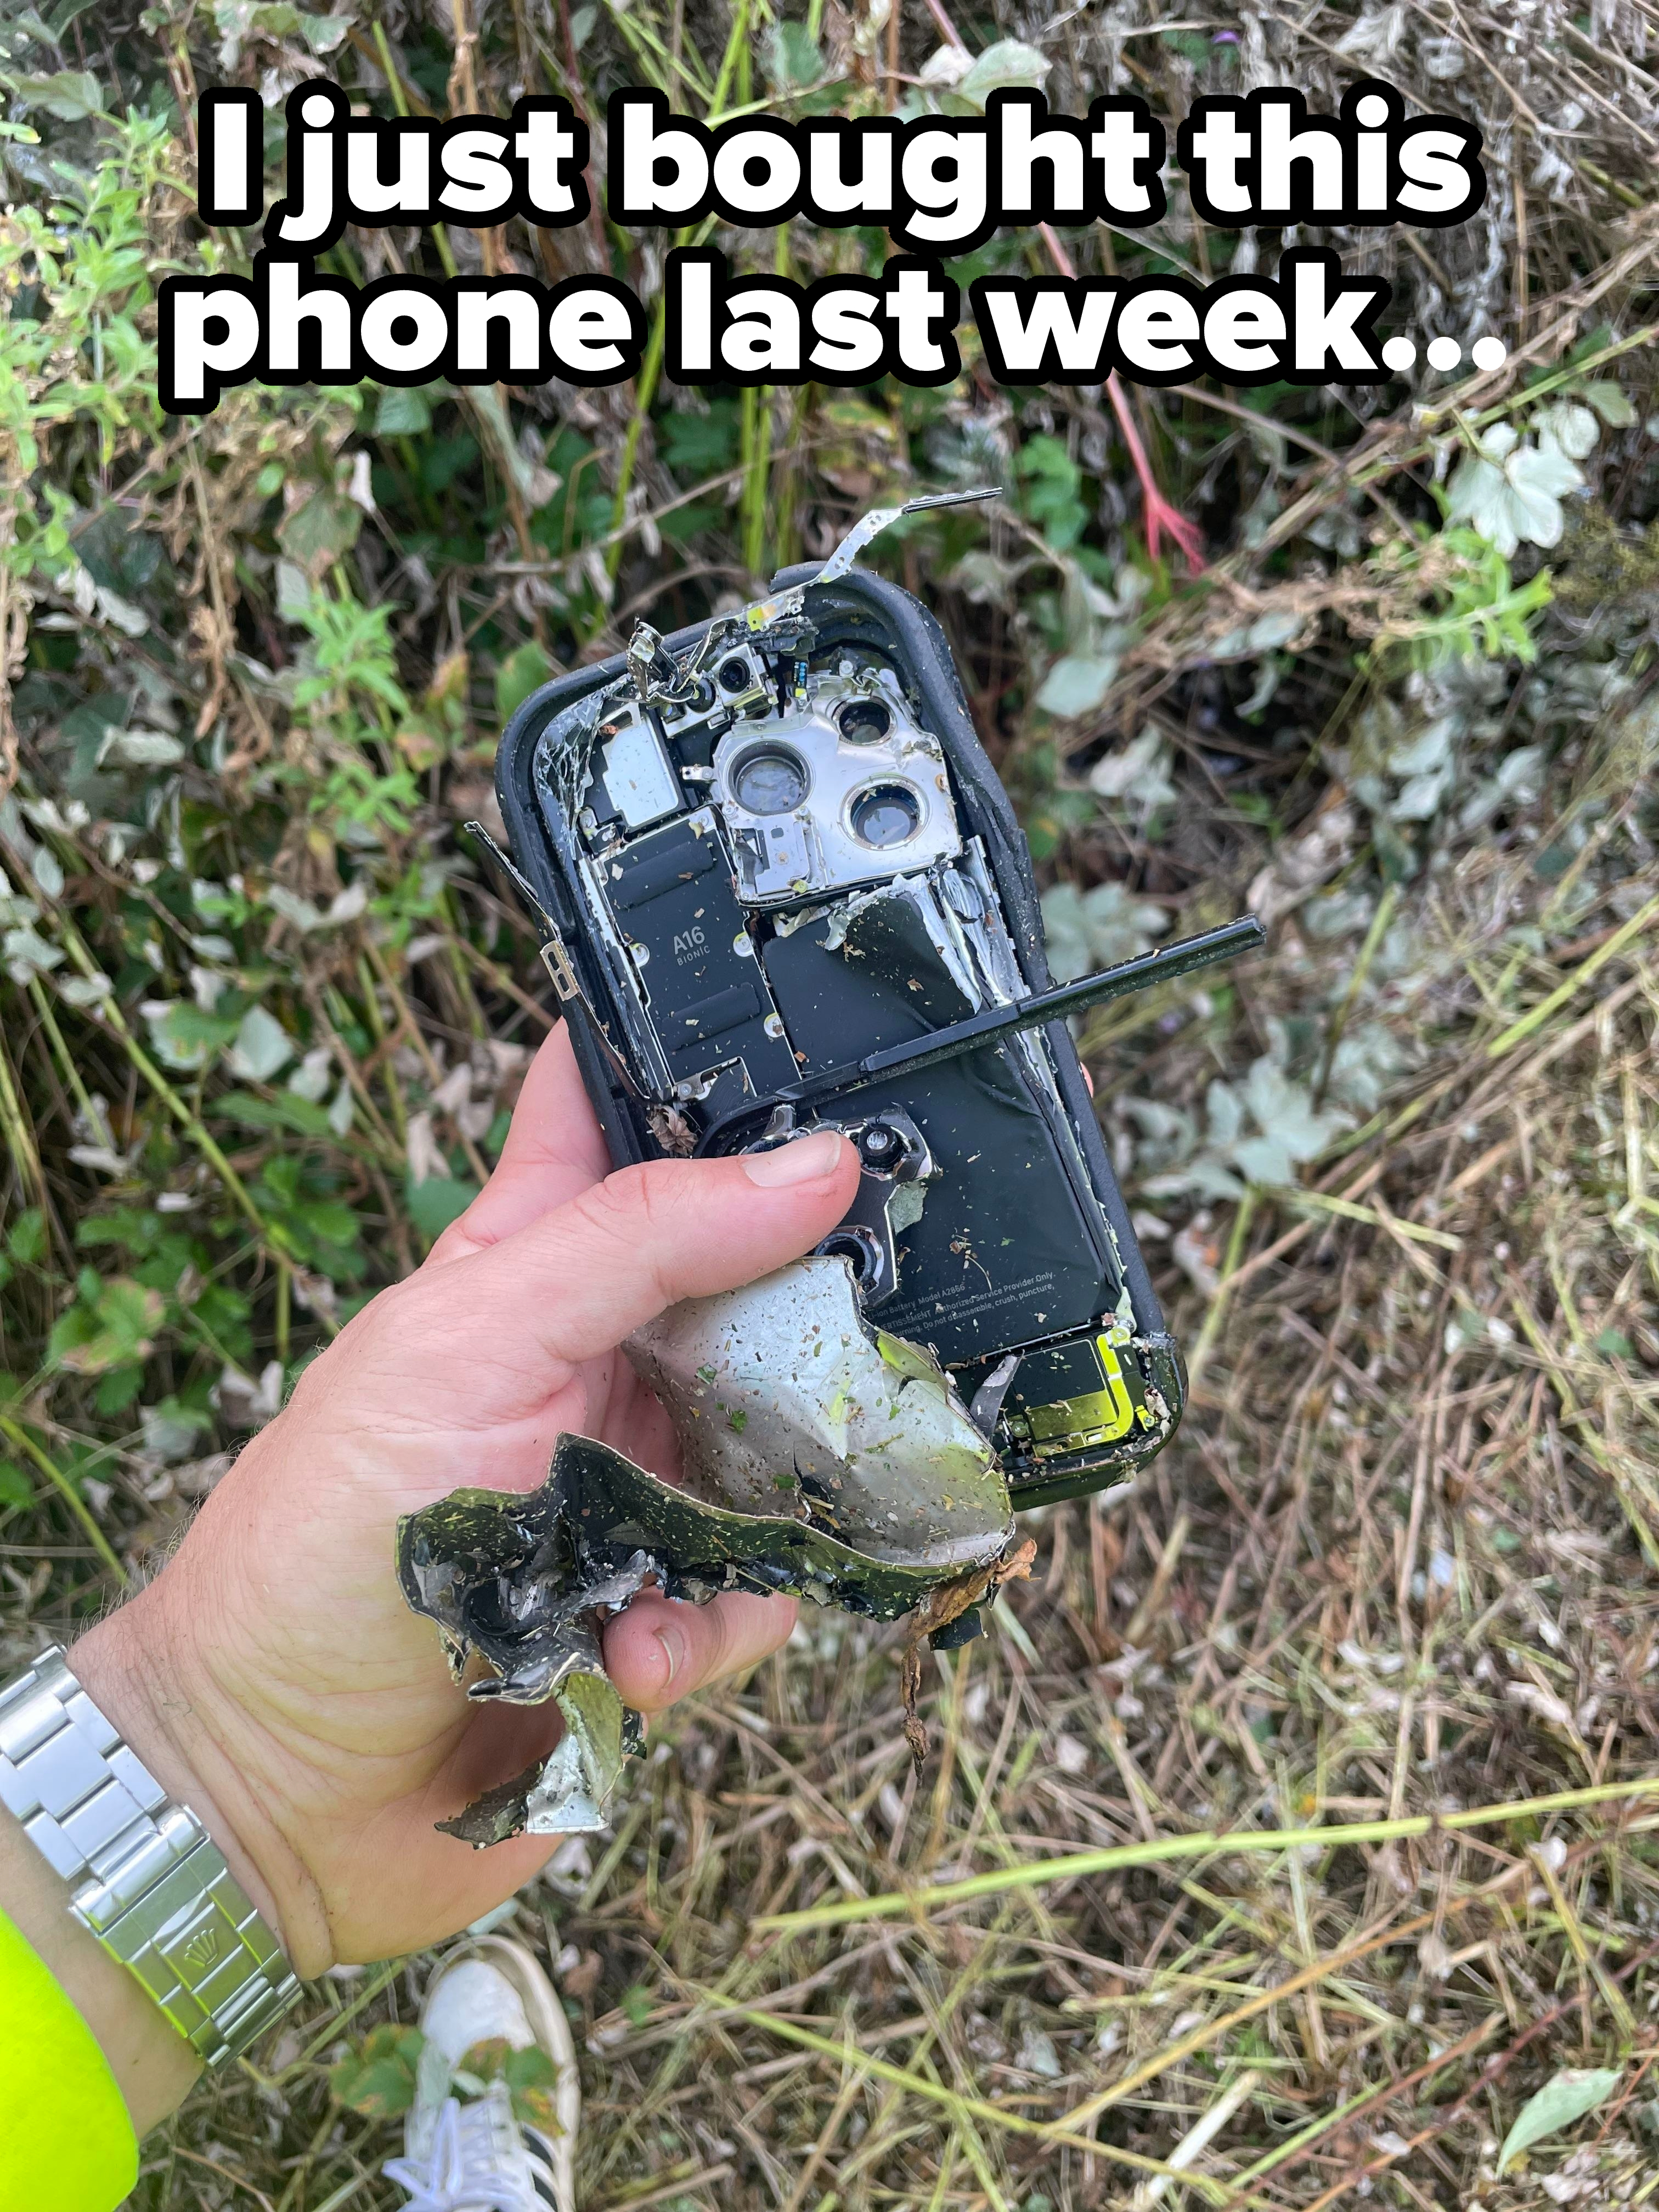 A destroyed phone